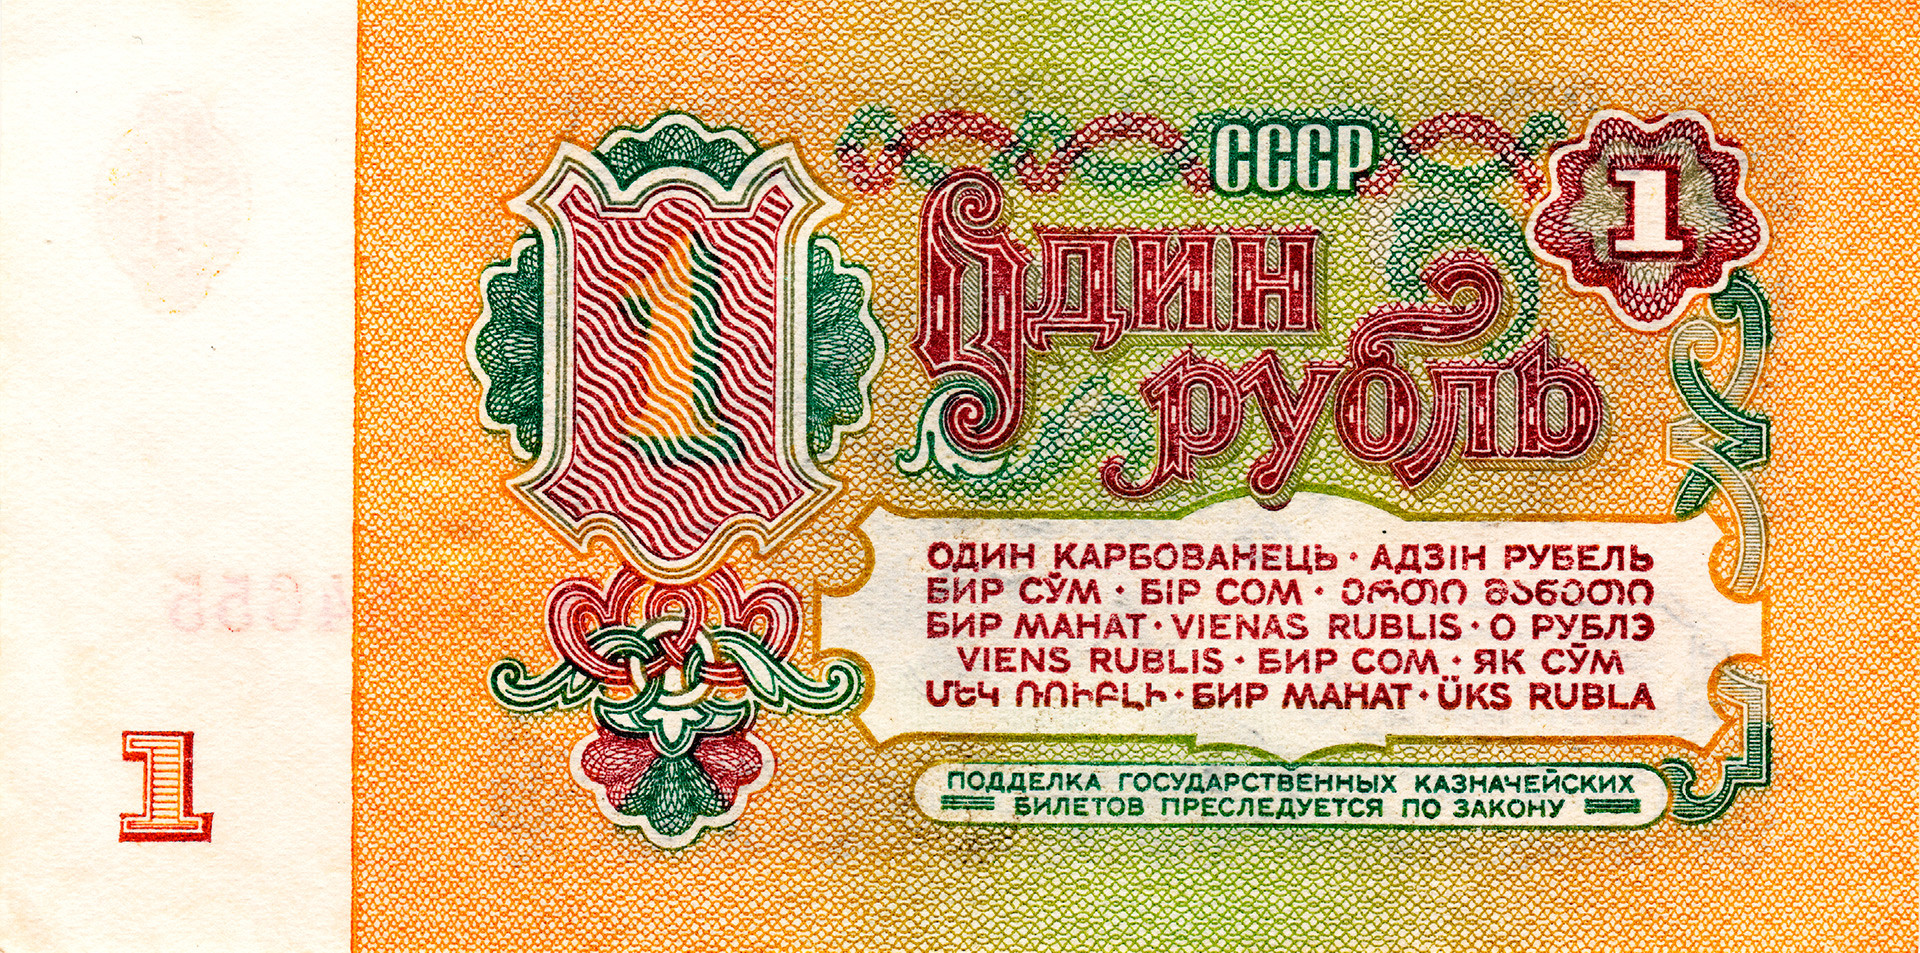 A 1-ruble banknote with translation in all the official languages of the USSR